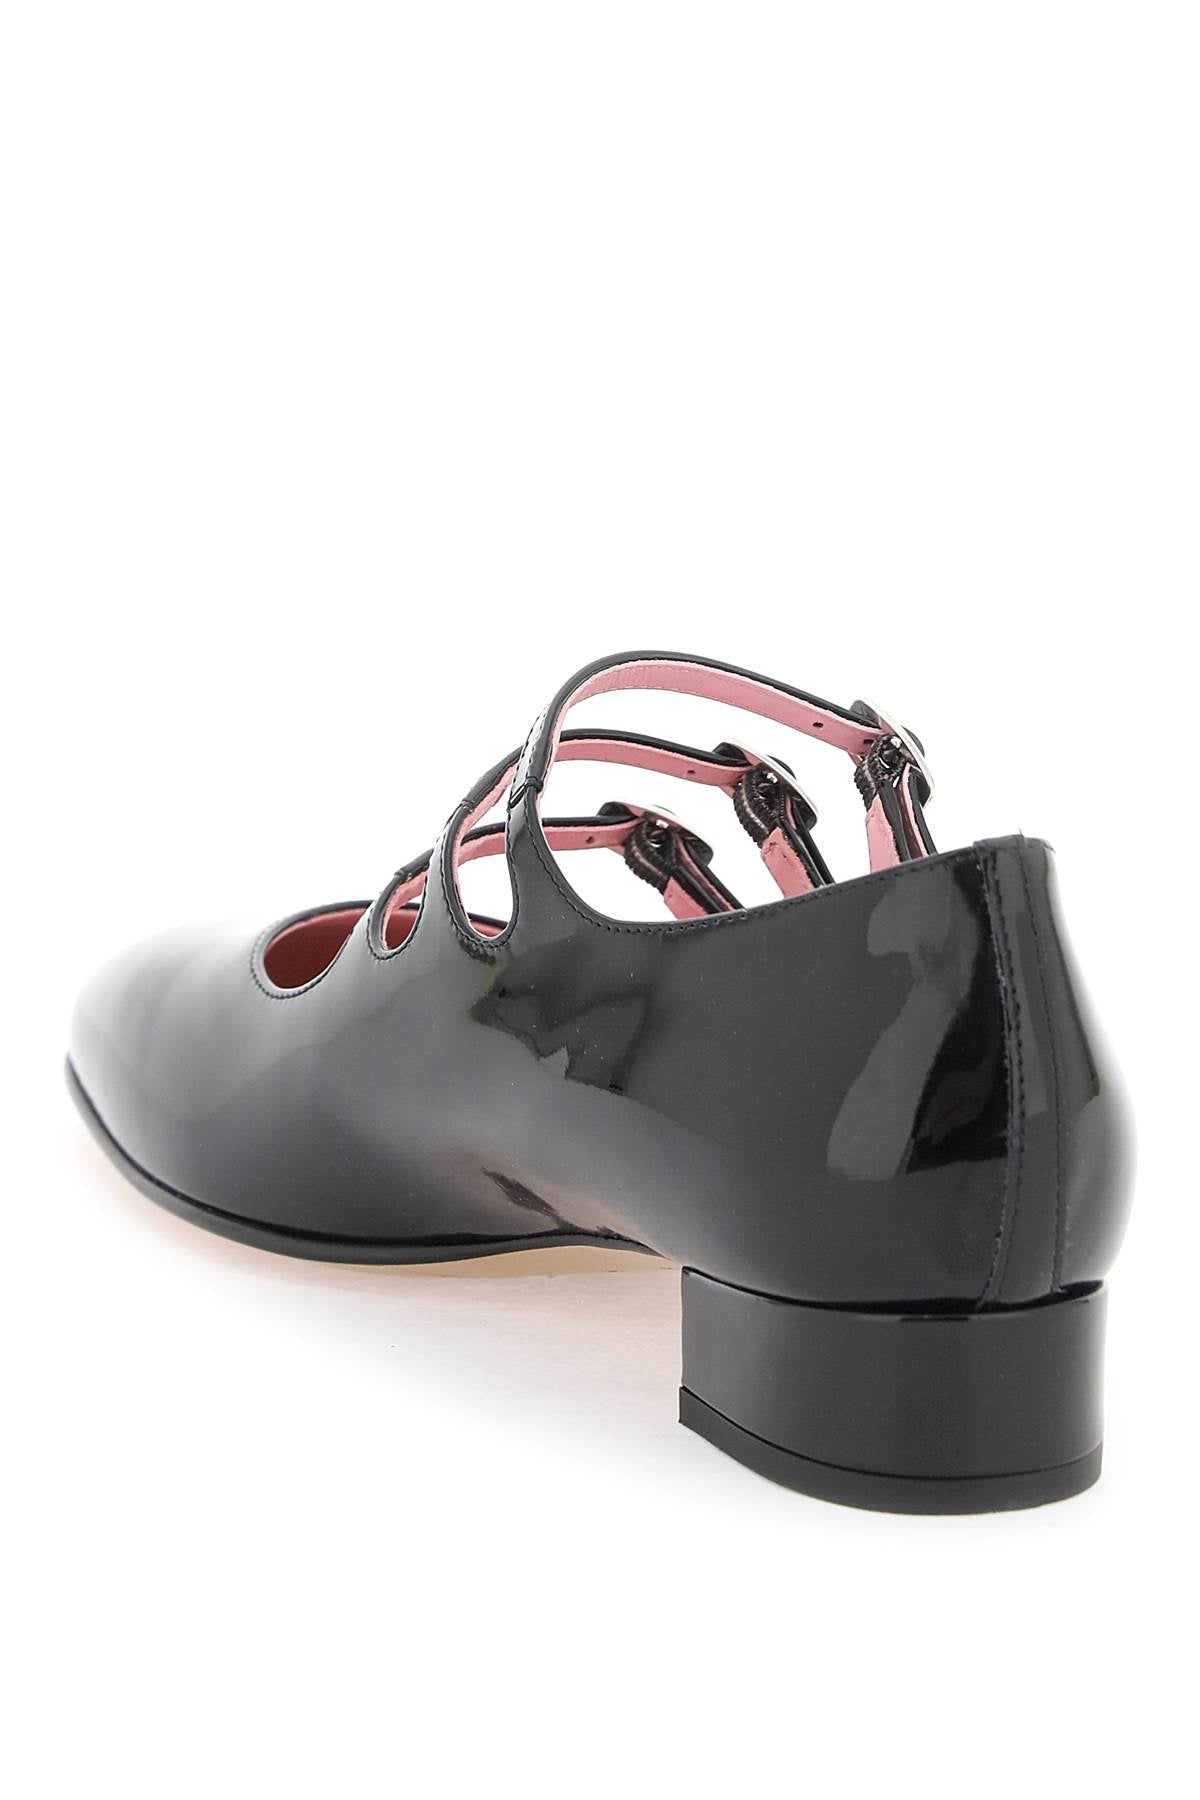 Carel patent leather ariana mary jane-2